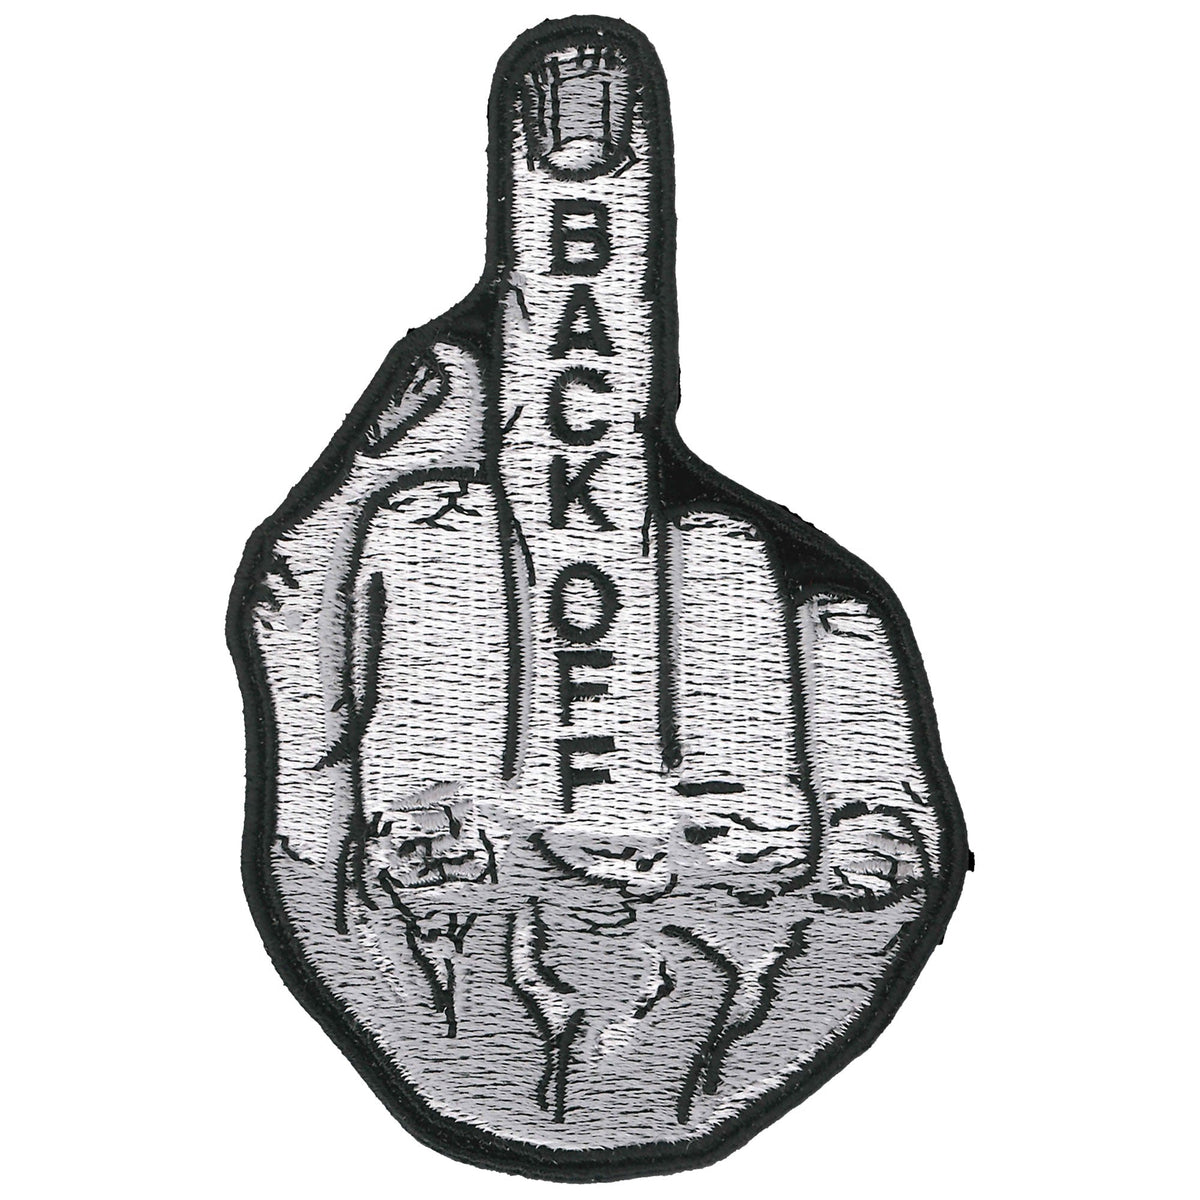 Hot Leathers Back Off Middle Finger 4" Patch